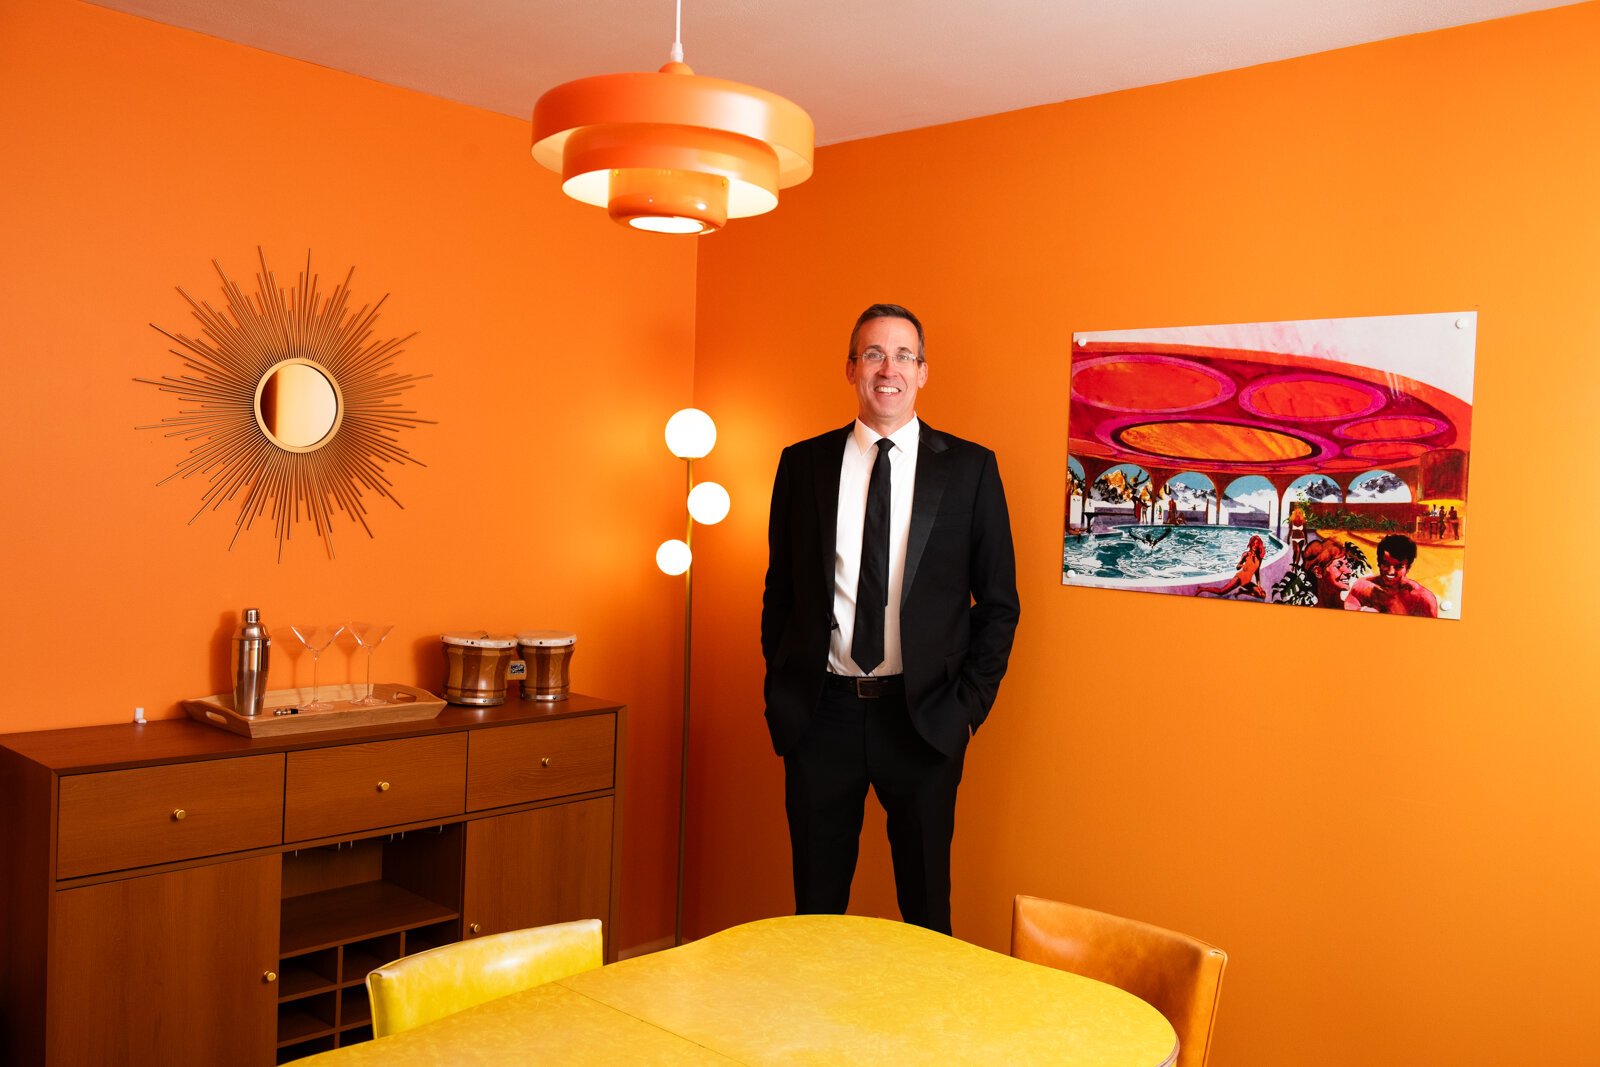 Property owner Mike Kelly, in the dining room of his Fort Wayne Airbnb, which is a recreation of Fawn Liebowitz's childhood home from the movie "Animal House."